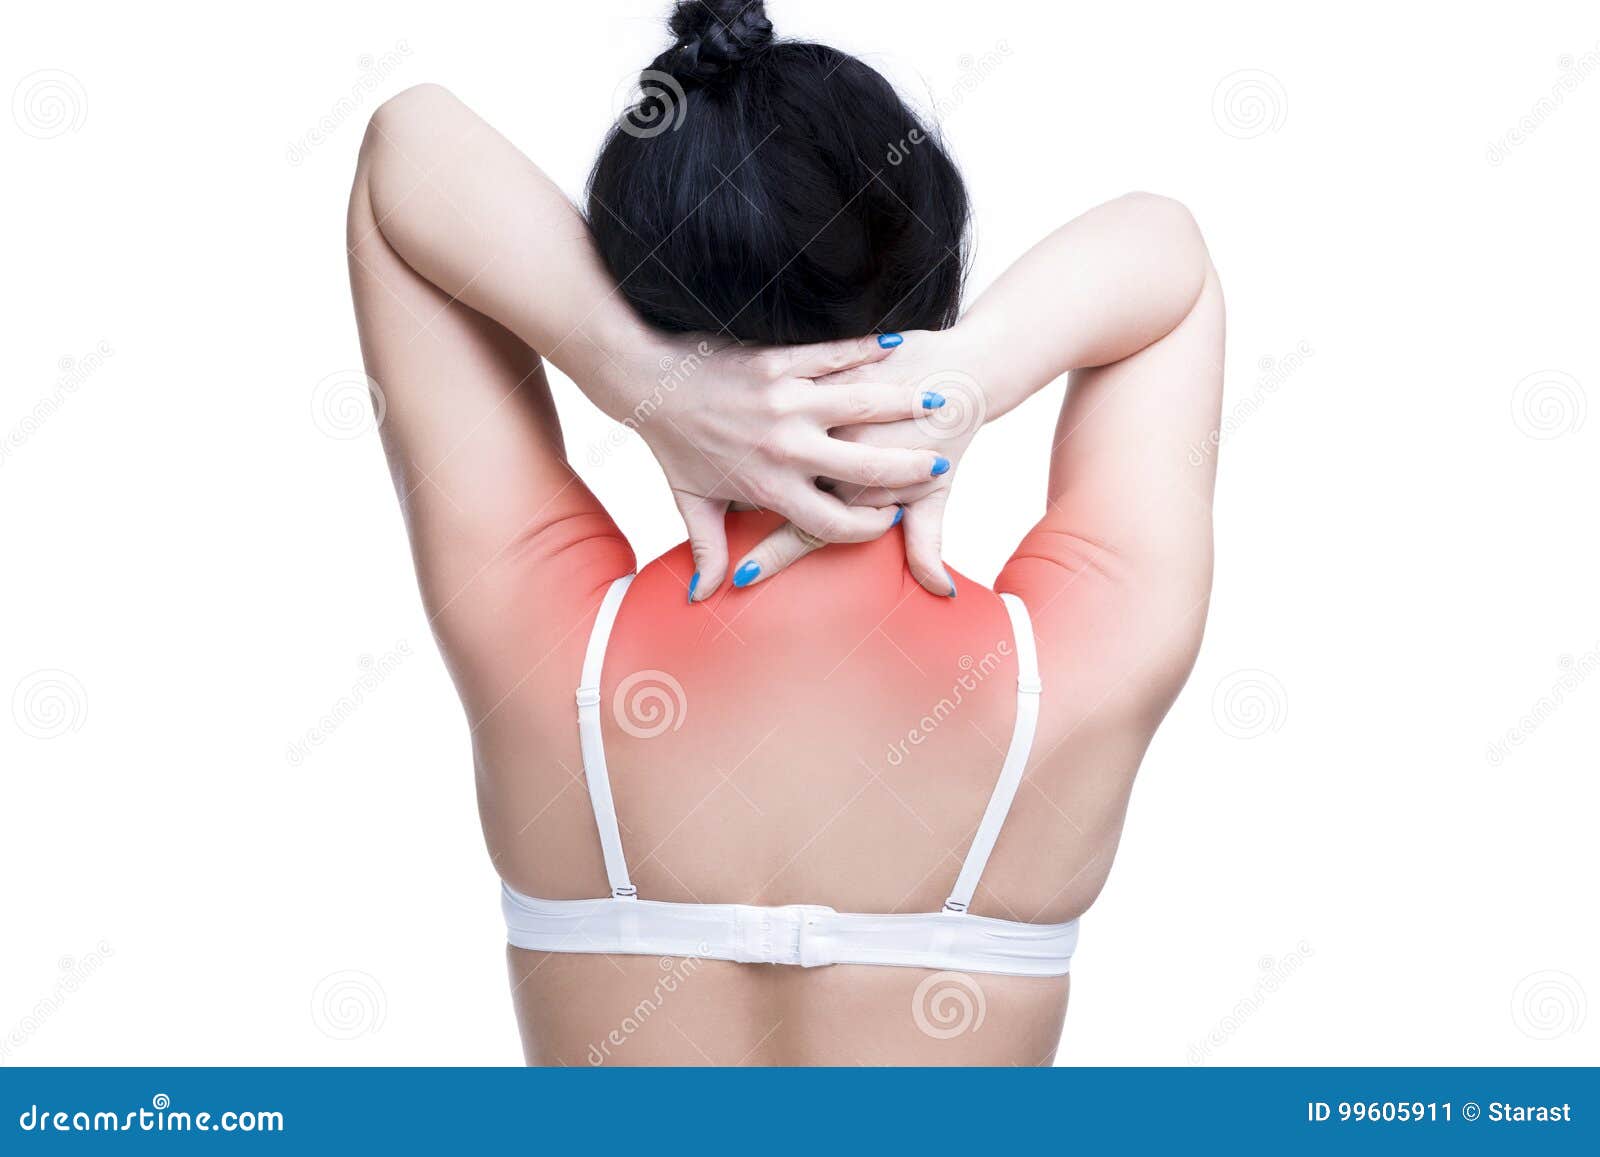 https://thumbs.dreamstime.com/z/young-caucasian-woman-bra-pain-shoulders-neck-ache-human-body-isolated-white-background-red-dots-99605911.jpg